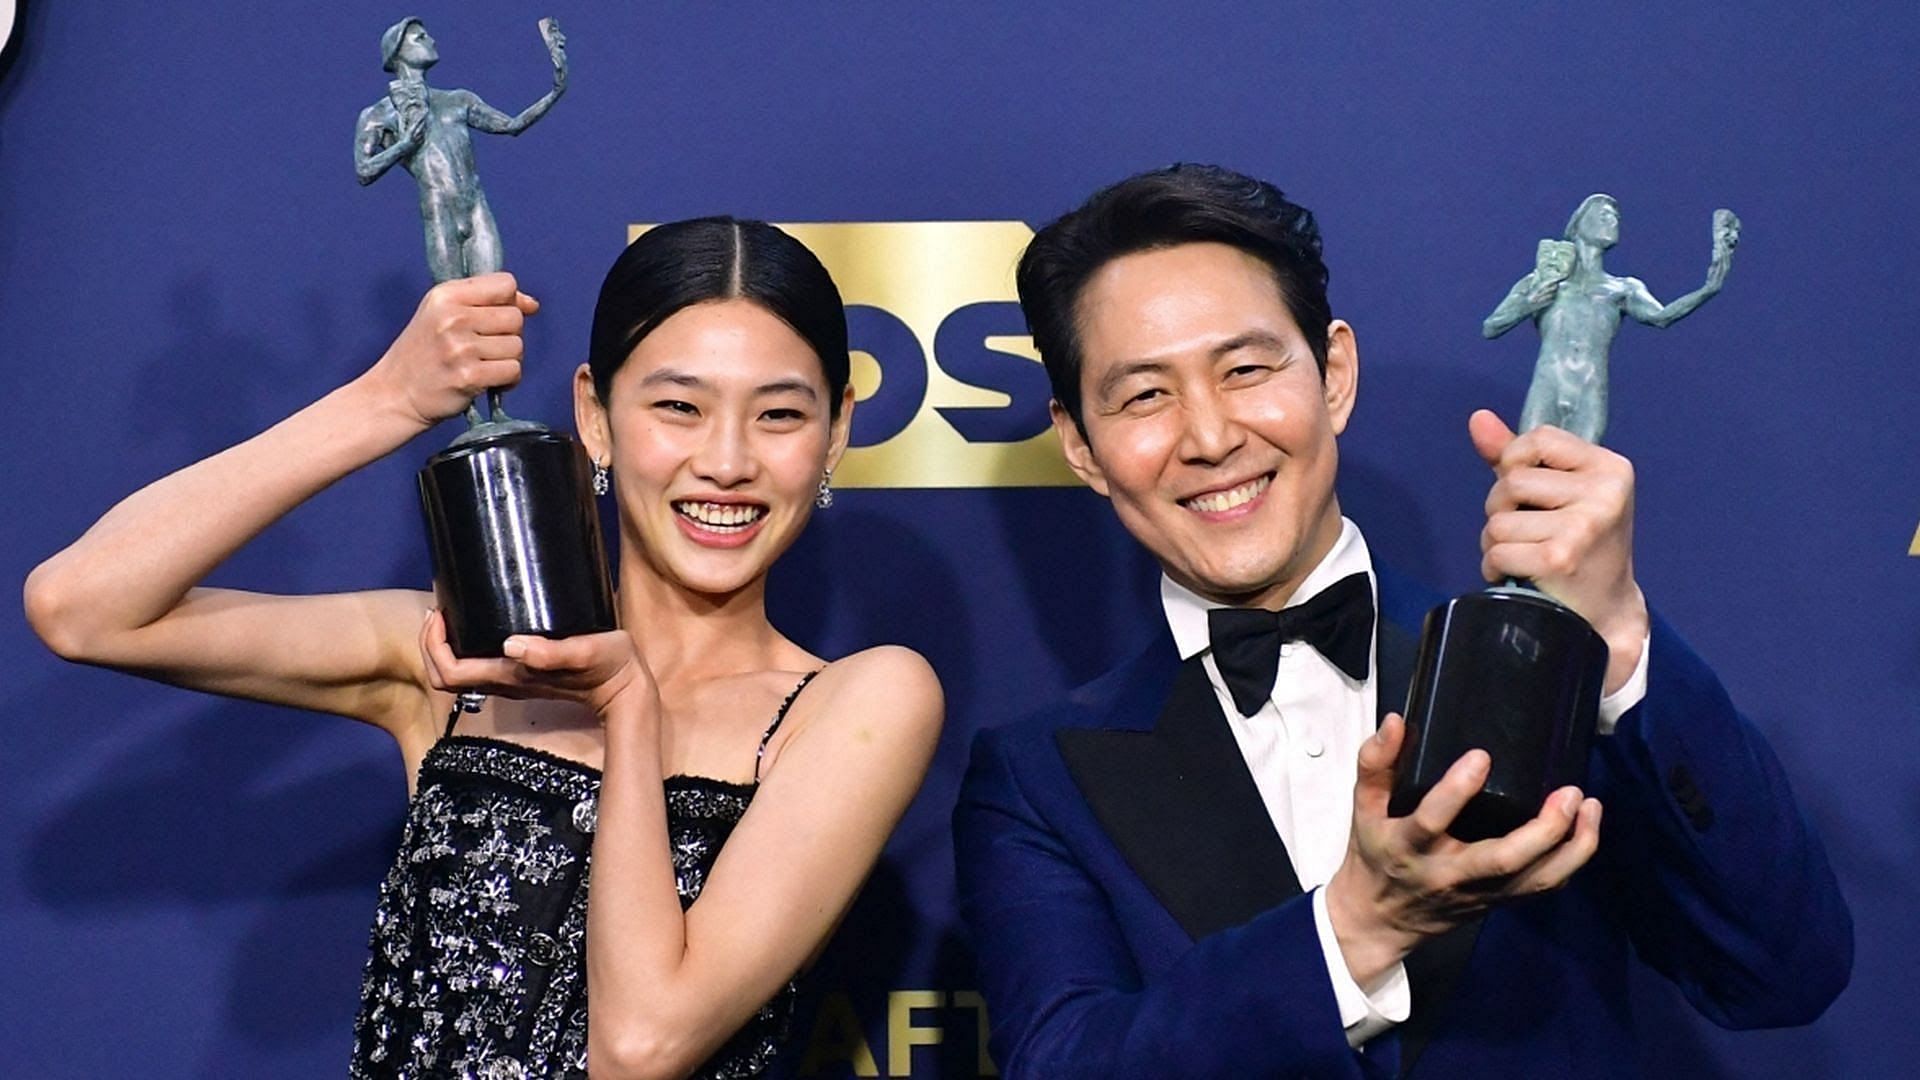 Squid Game&#039; actors Jung Ho-yeon and Lee Jung-jae at the SAG Awards 2022 (Image via Getty)